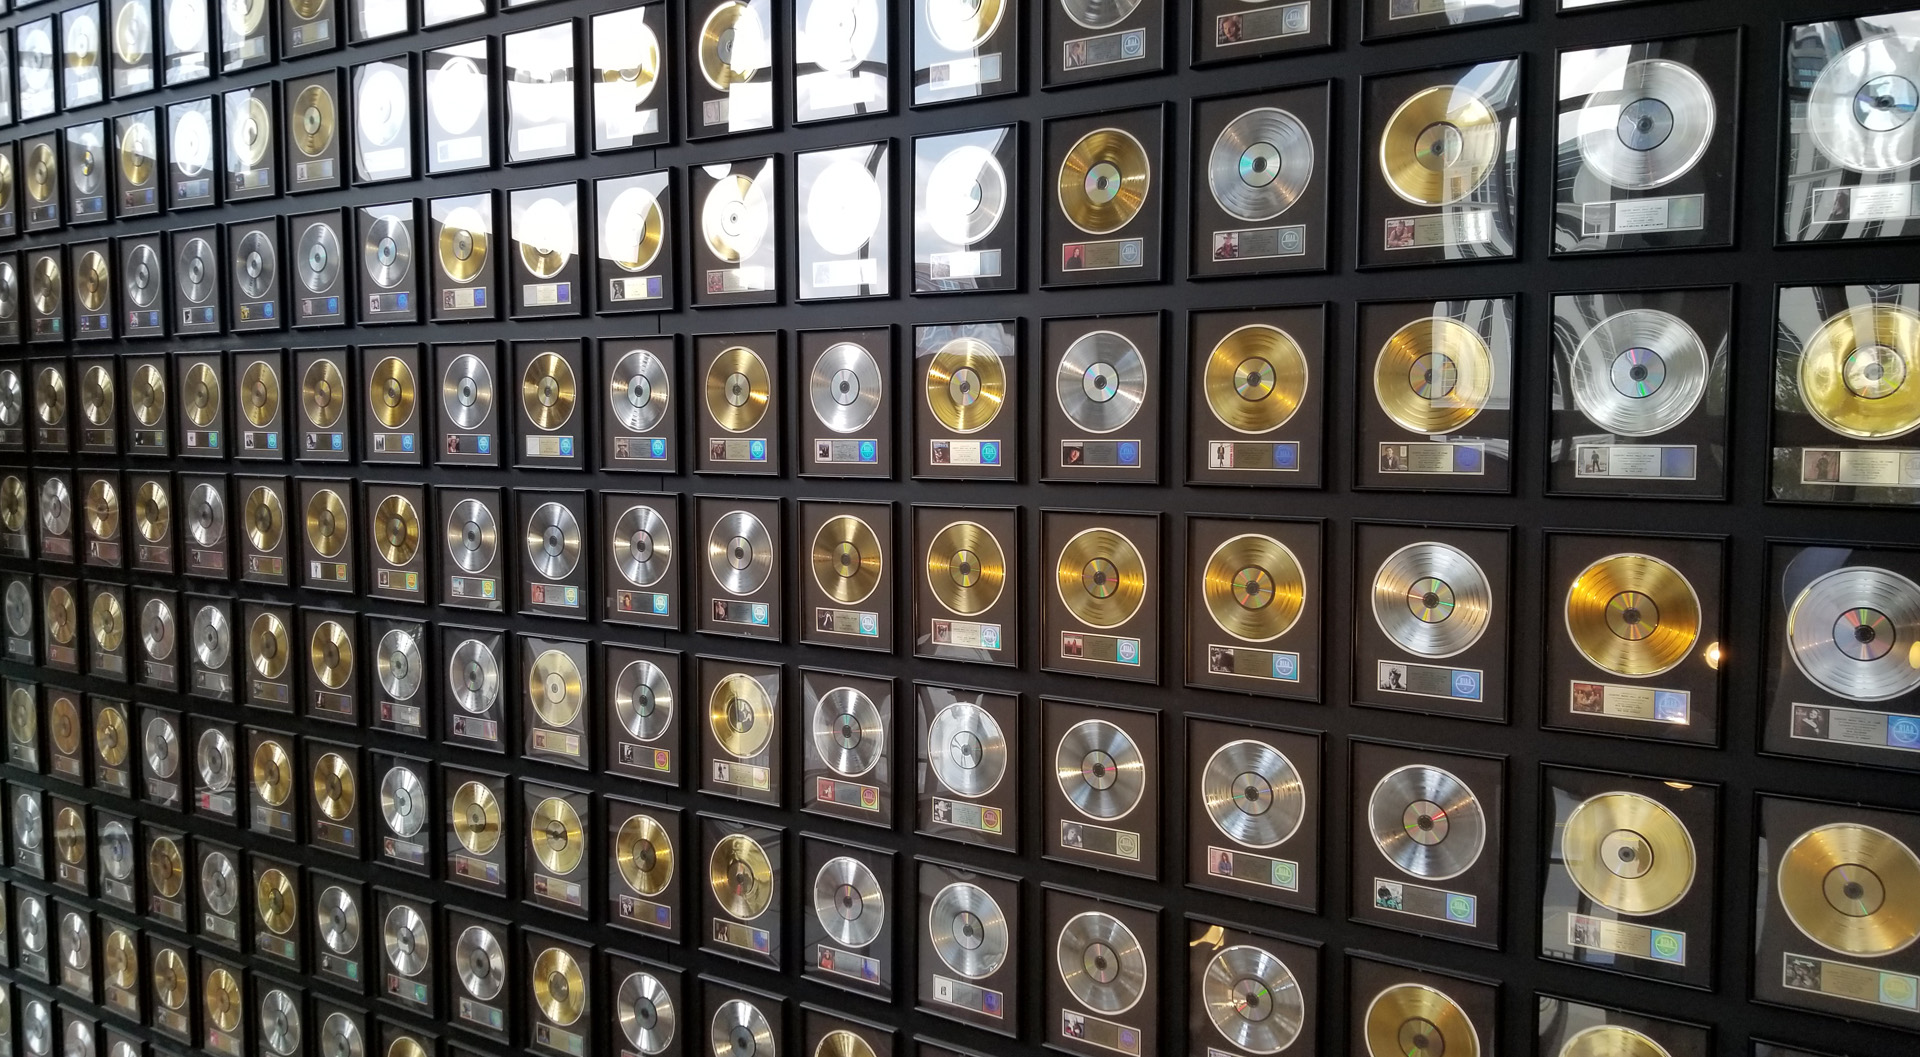 Country Music Awards Wall